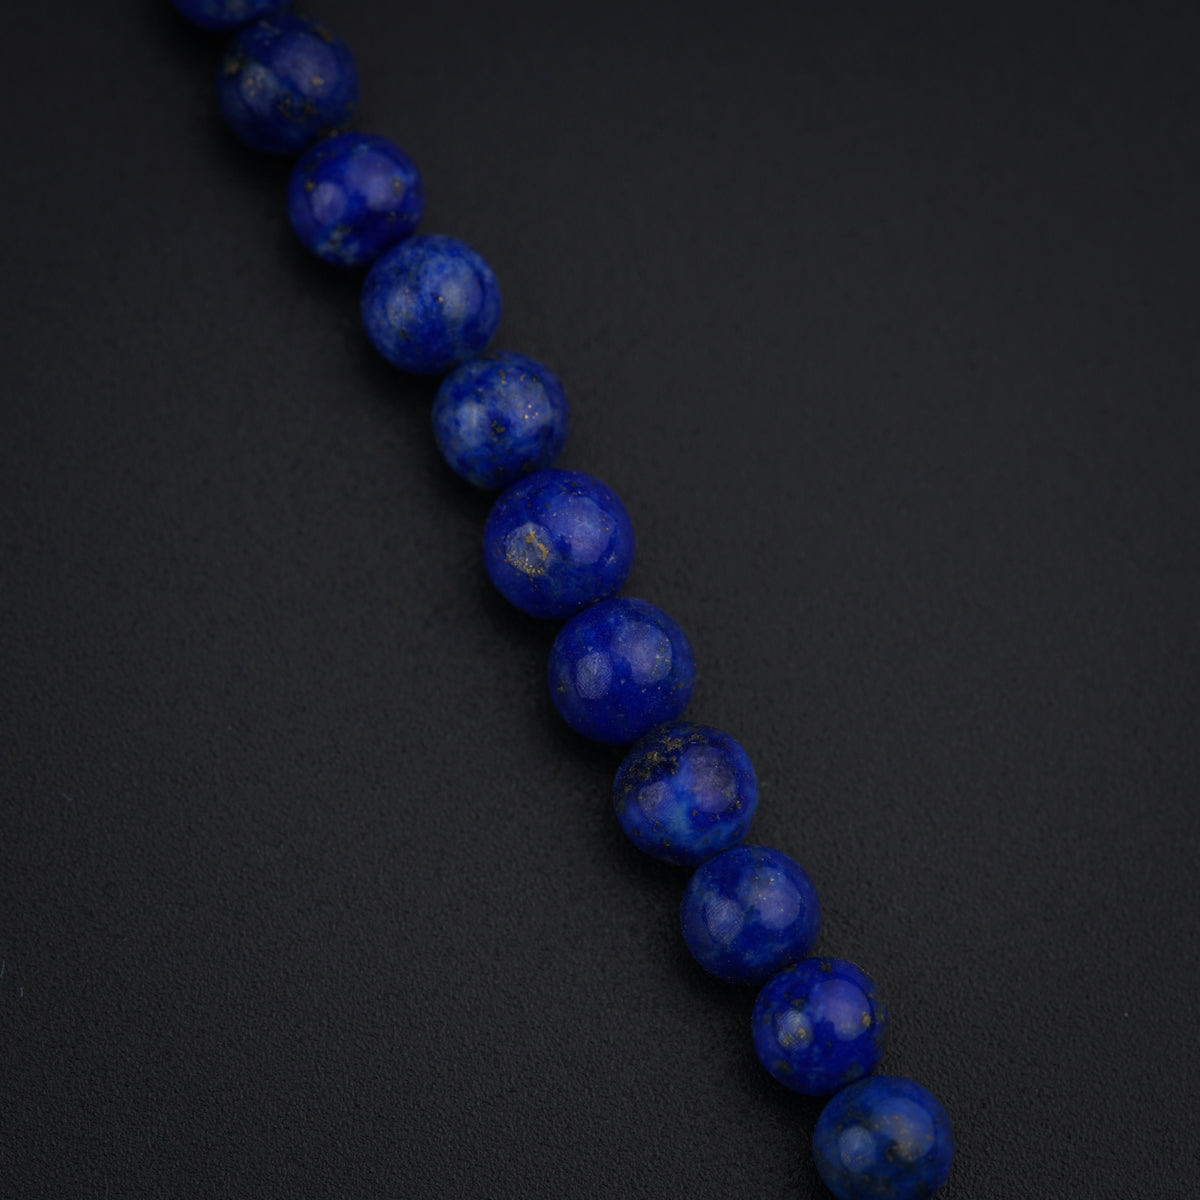 a close up of a blue bead on a black surface